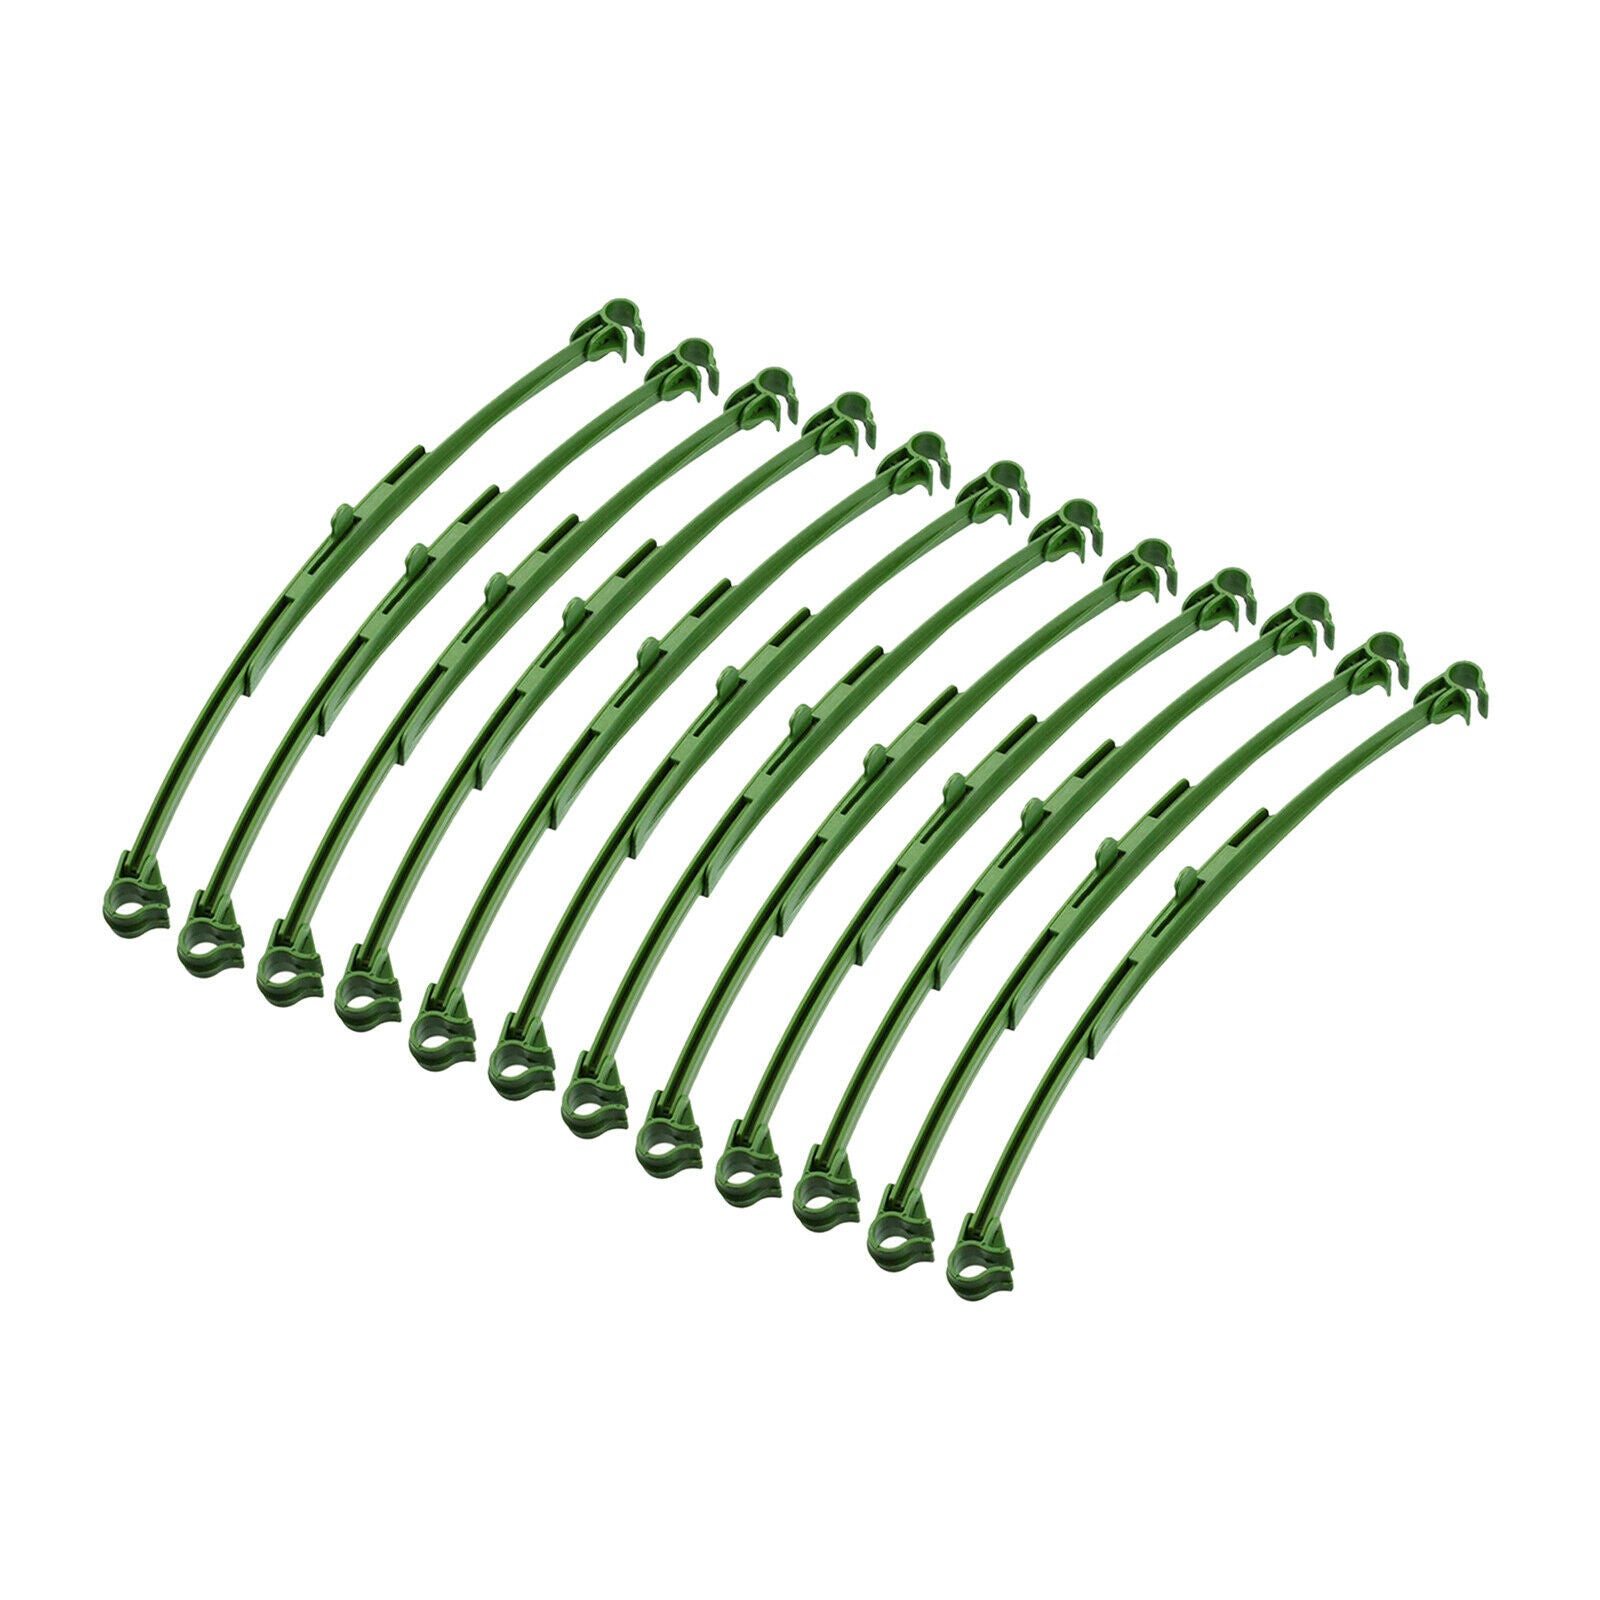 12Pack inch Trellis Connector Stake Arms Plants Stem Support Growth Aid